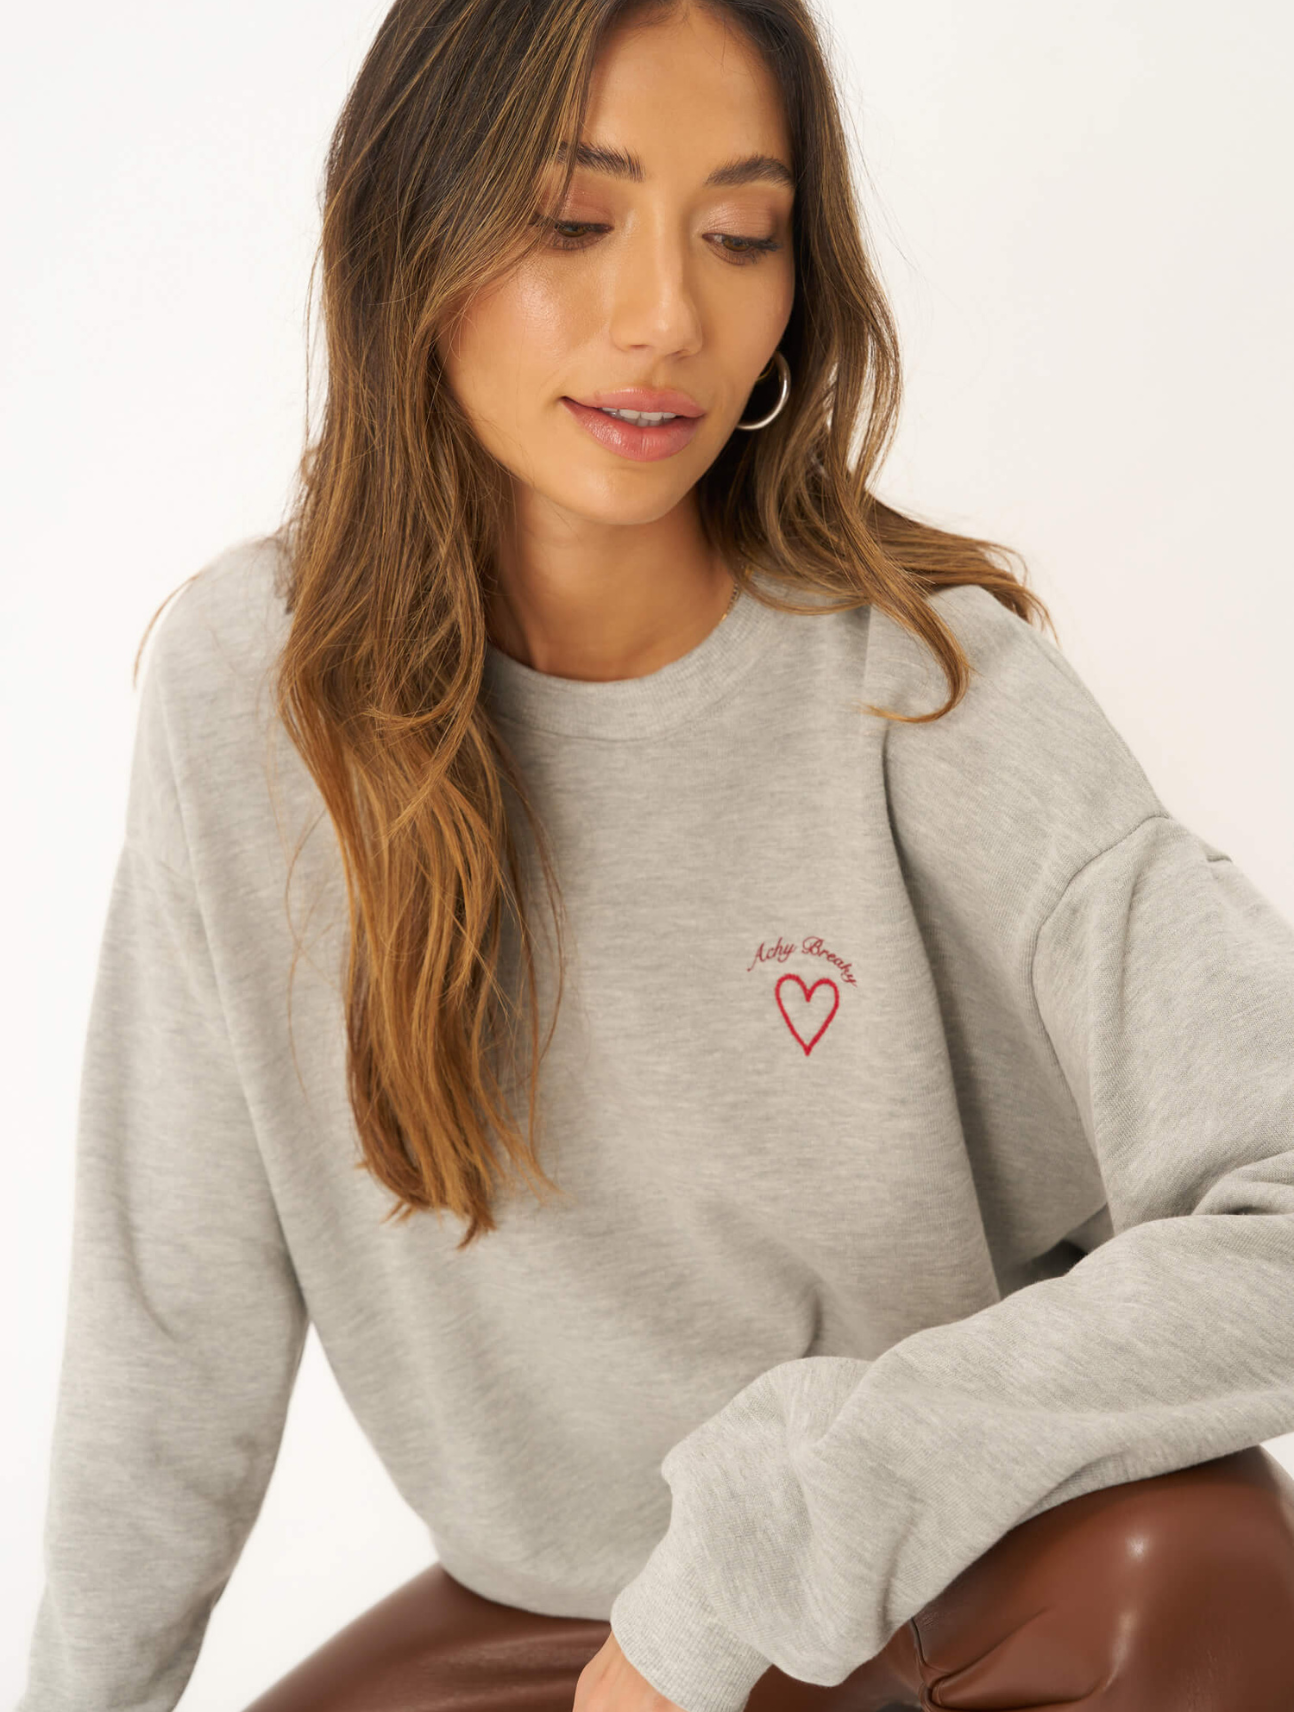 Achy Breaky Embroidered Sweatshirt